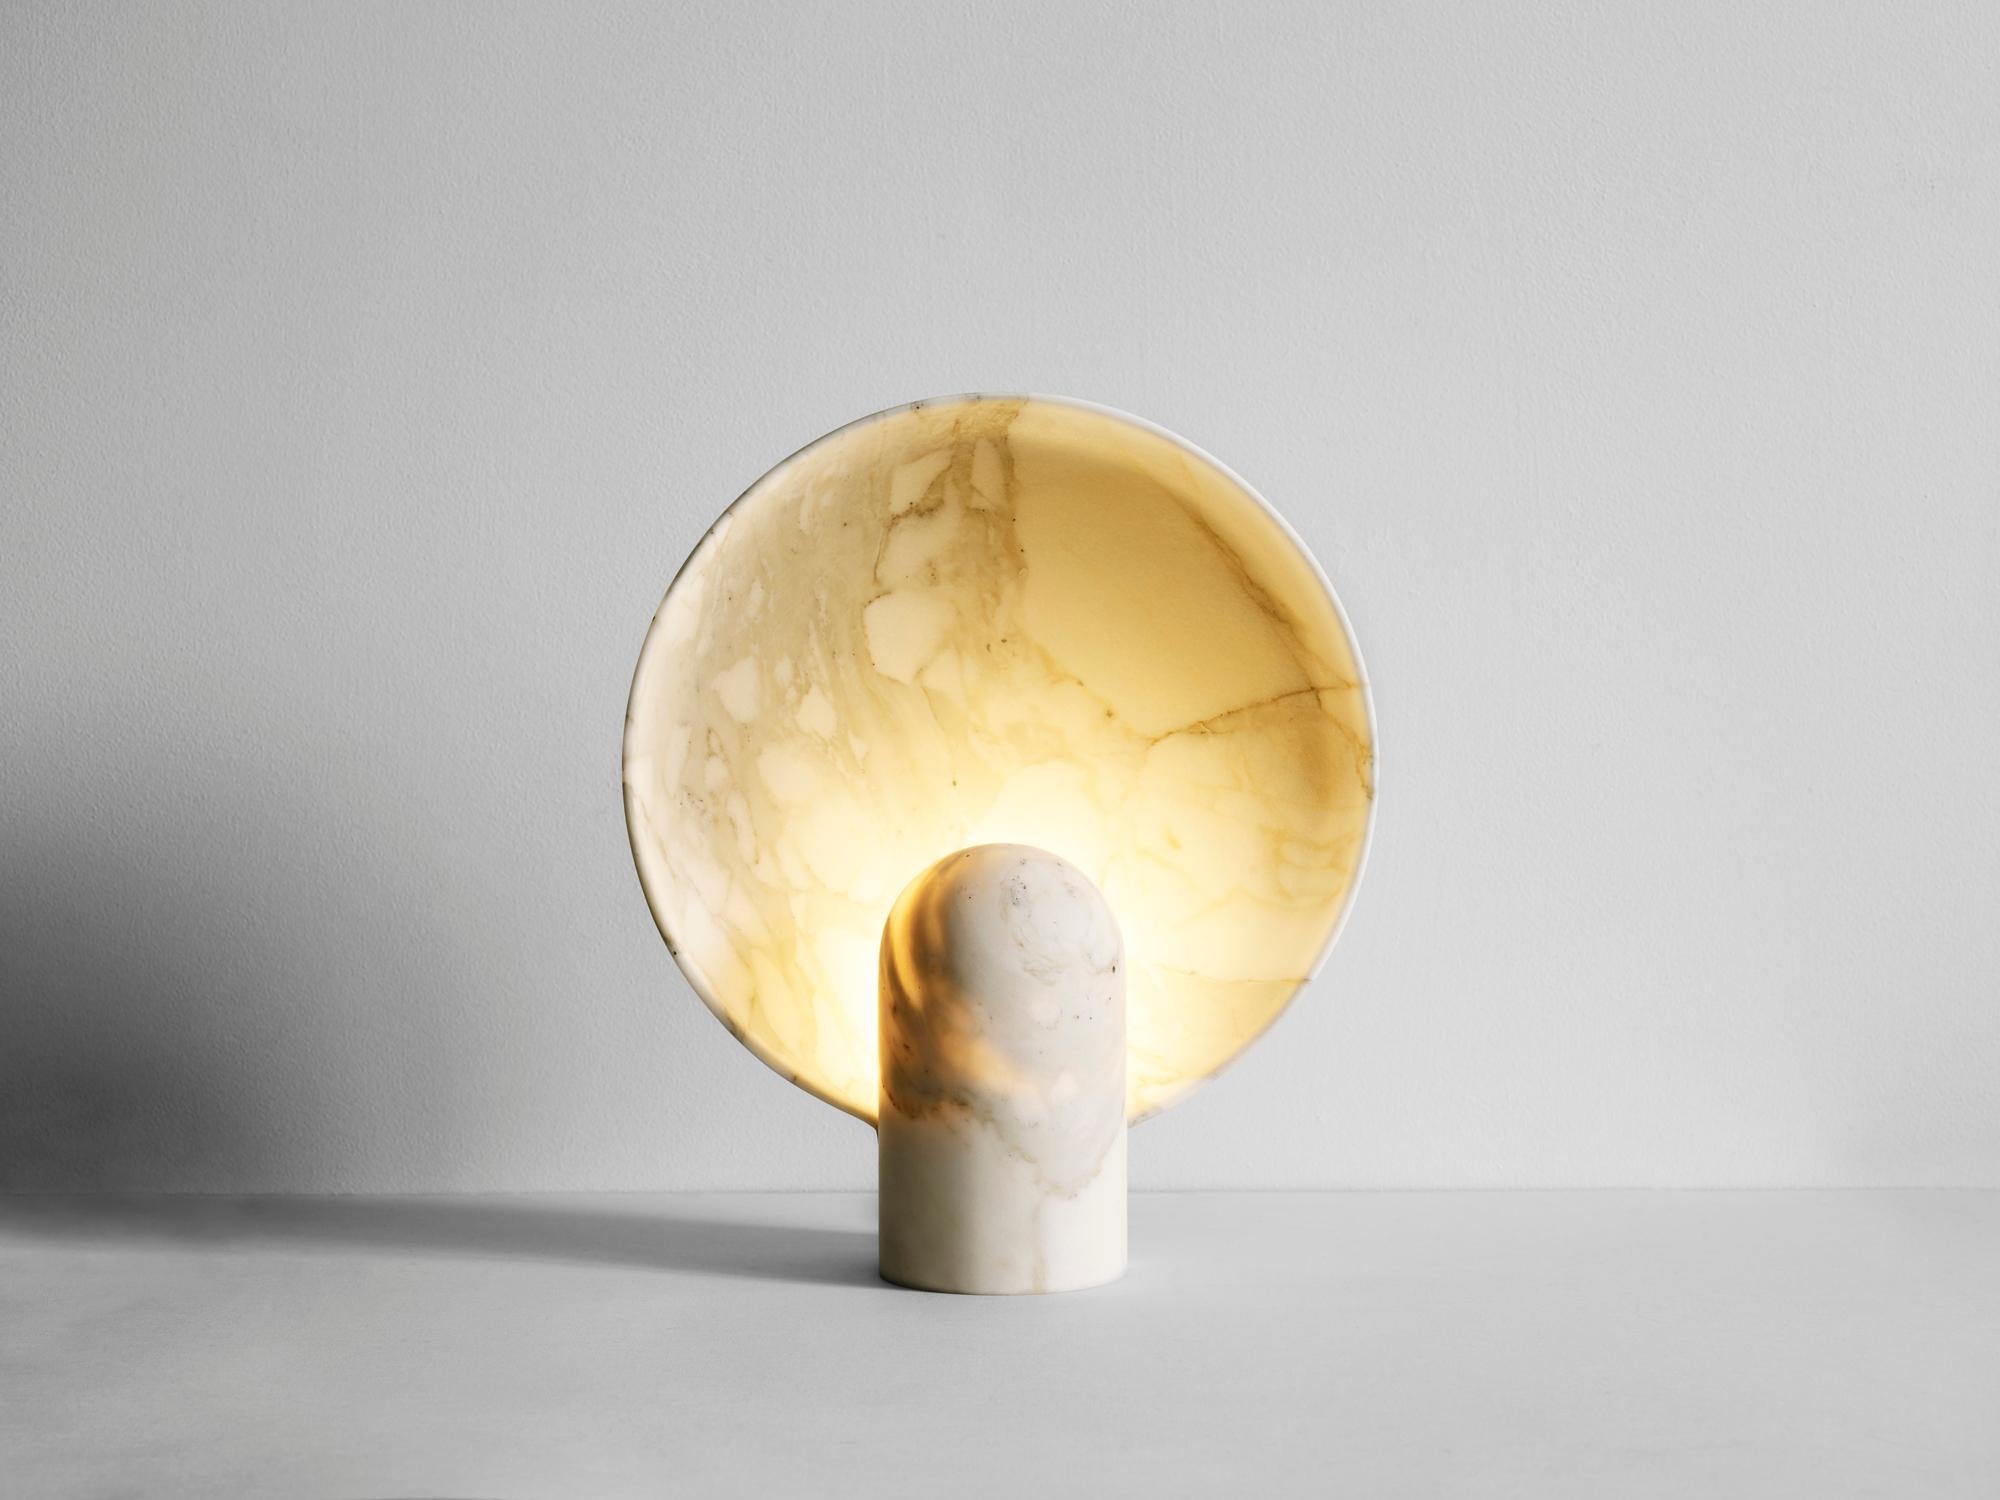 Calacatta Surface Sconce by Henry Wilson
Dimensions: W 30 x D 11 x H 35 cm
Materials: Calacatta Marble

This sculptural item is handmade in Sydney Australia.

The surface sconce in Calacatta marble is an ambient, sculptural light carved in two